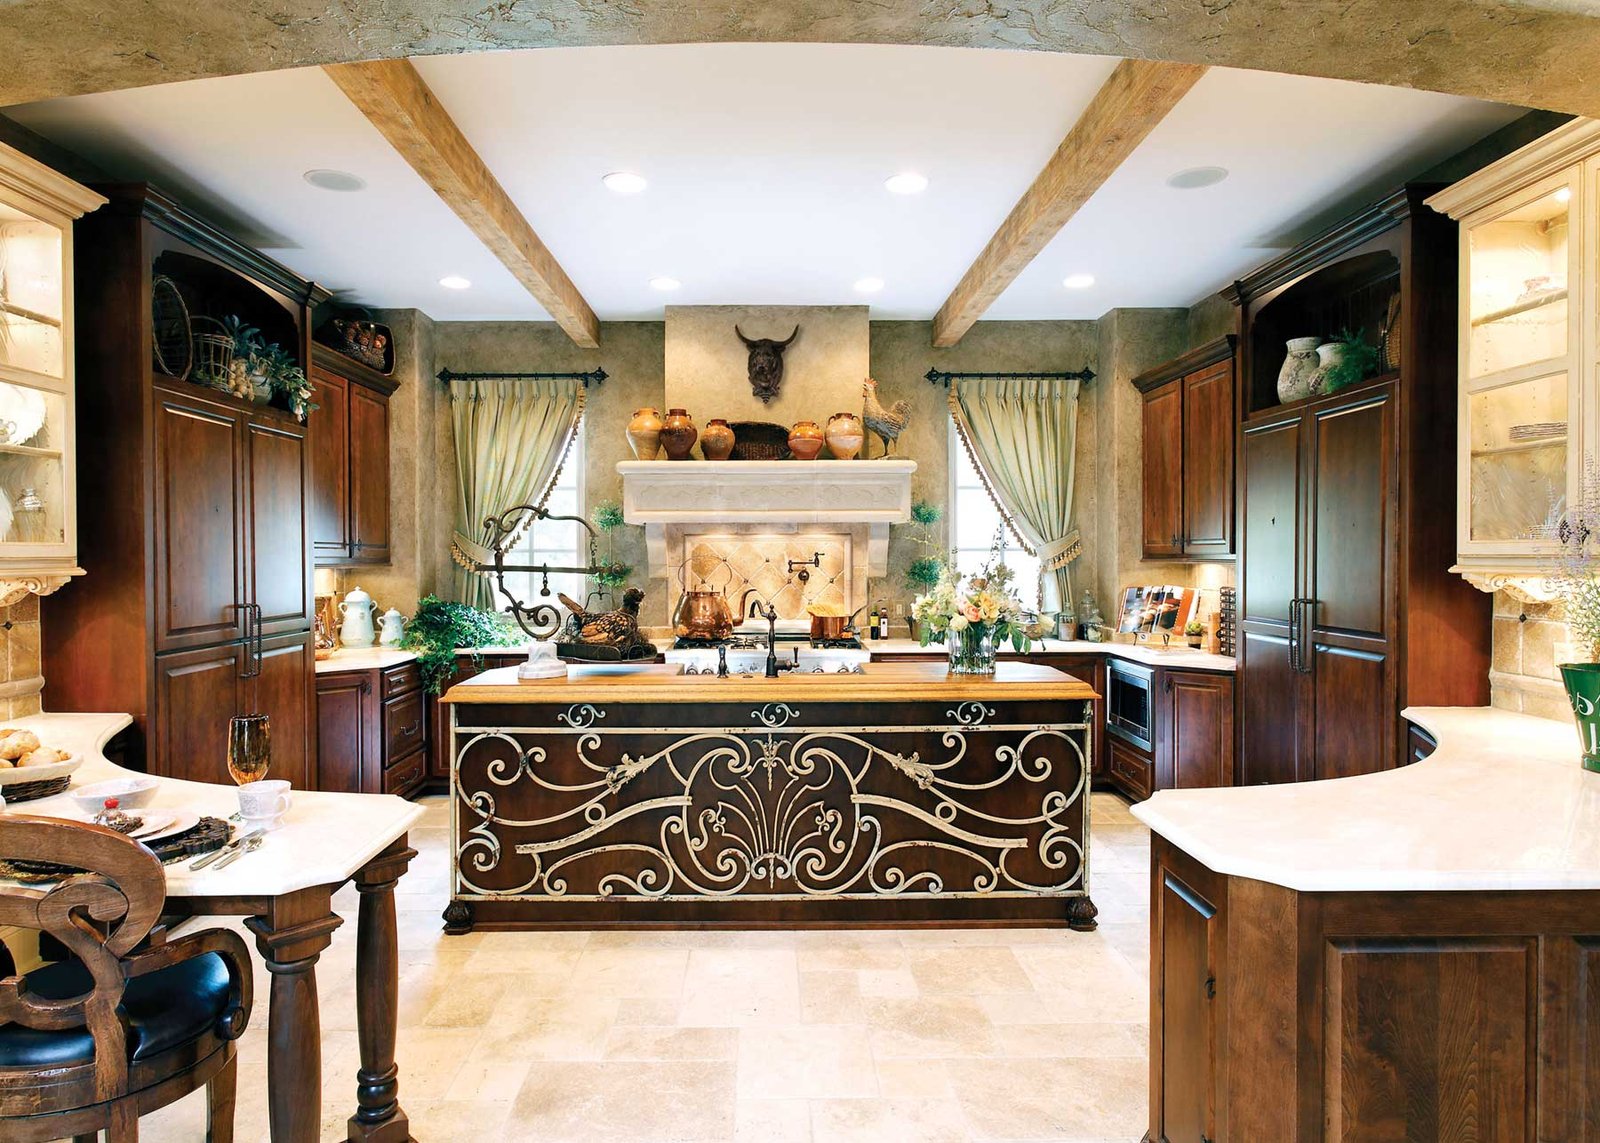 Mediterranean Fusion: Blending Modern Elements With Traditional Flair